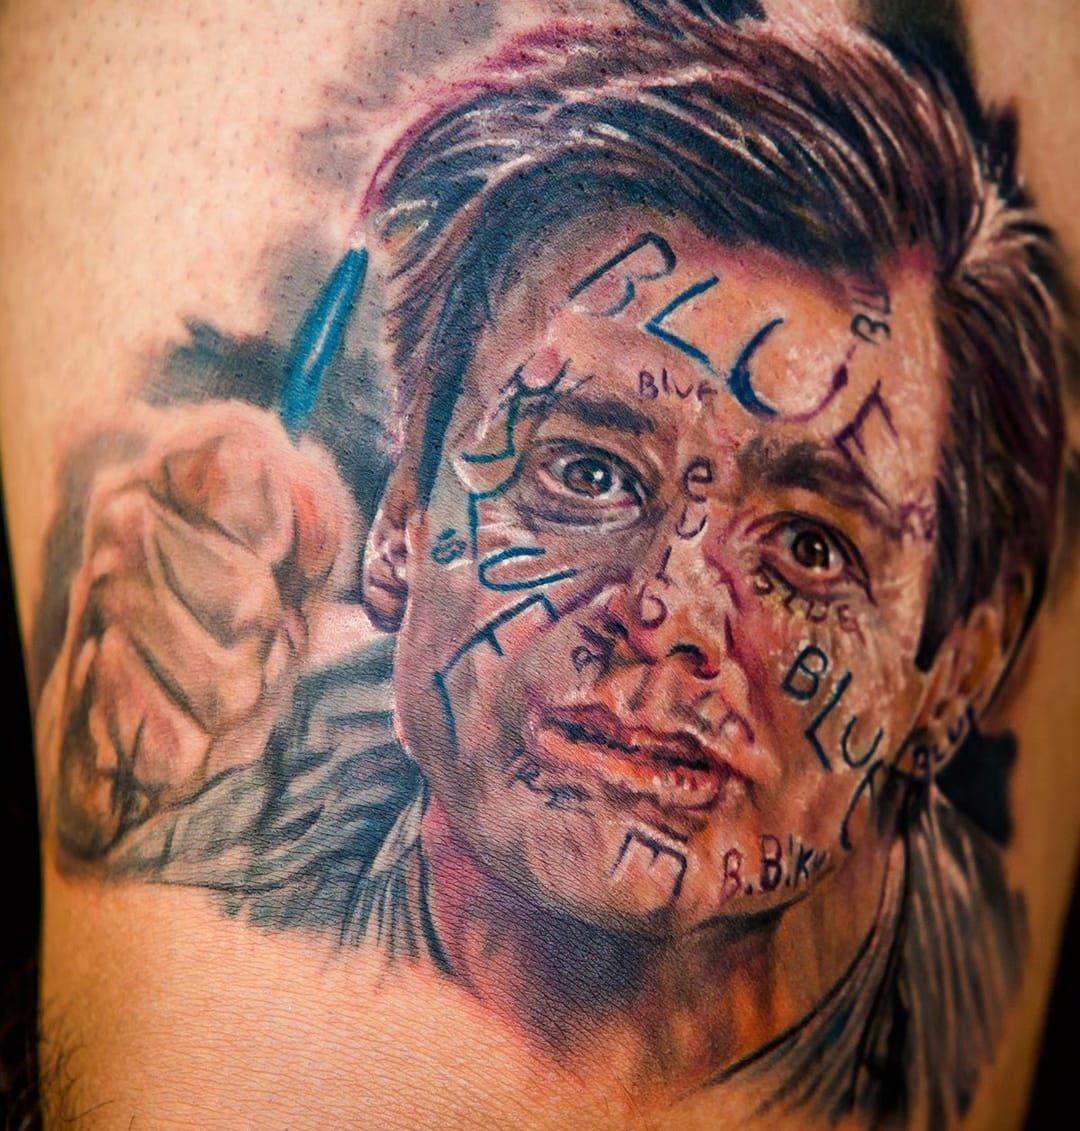 Fantastic Jim Carrey portrait done by Lord Nelson Tattoos with  magnumtattoosupplies  Jim carrey Jim carey Tattoos